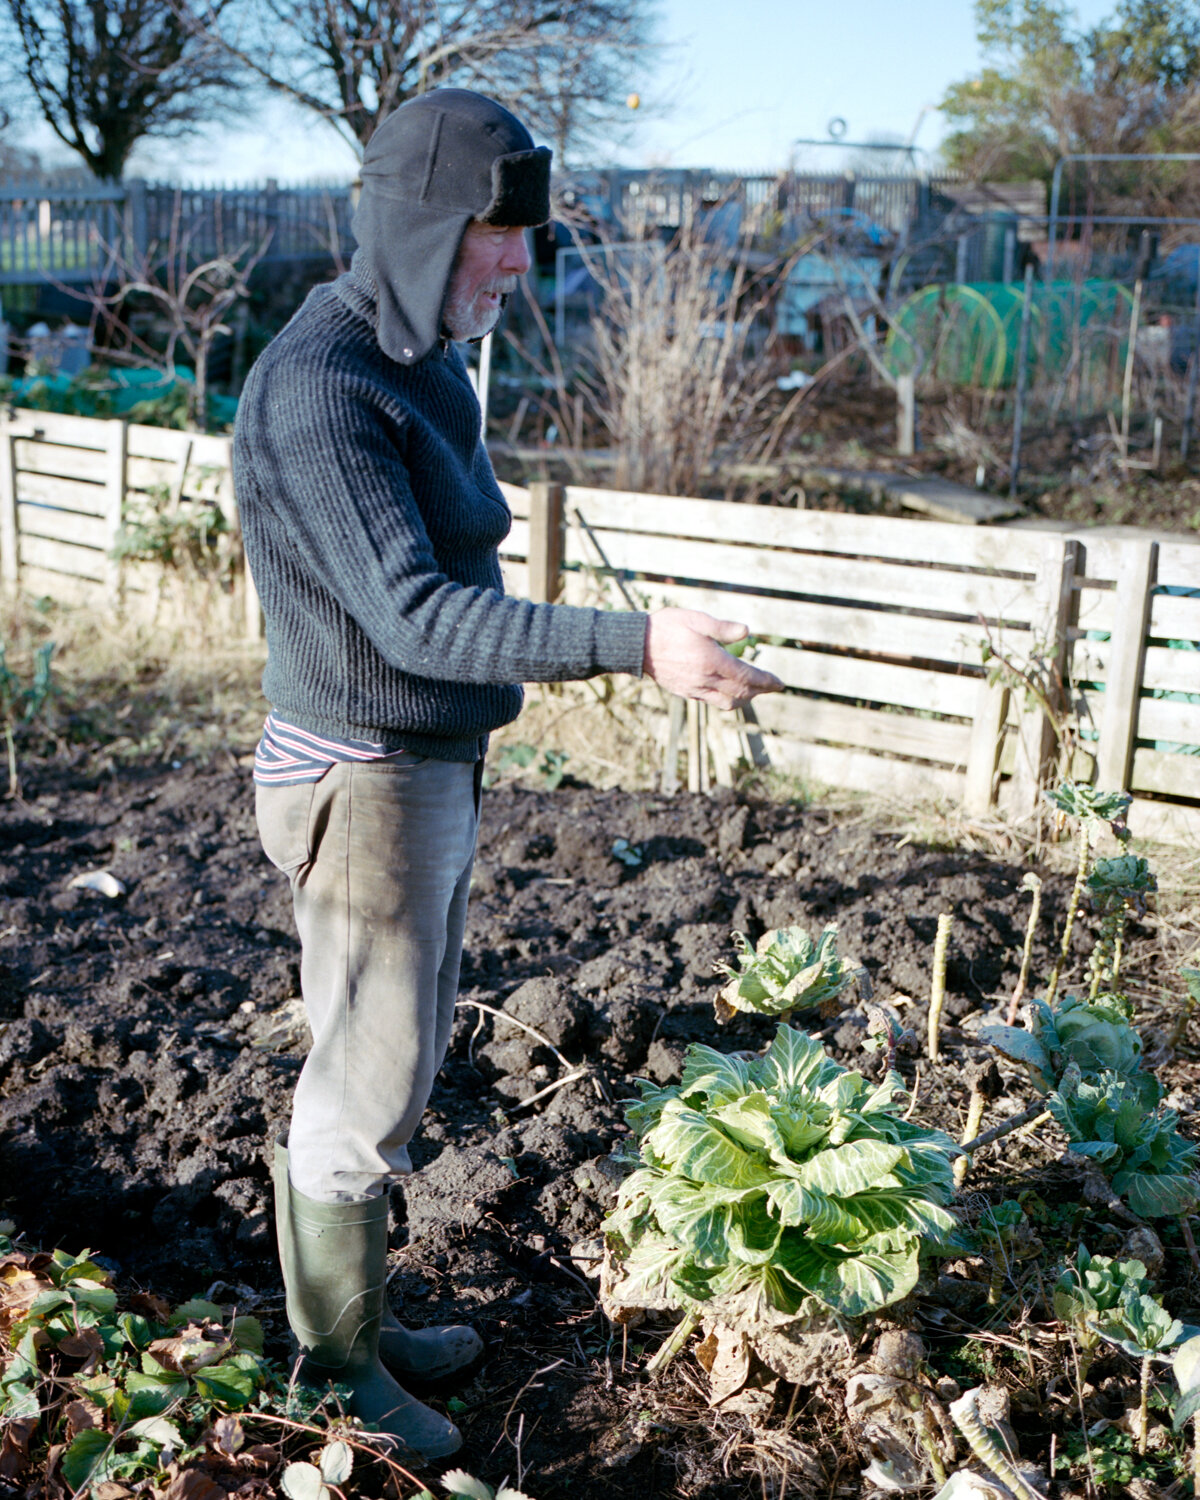 6) Jimmy Showing His Cabbages - Church View.jpg